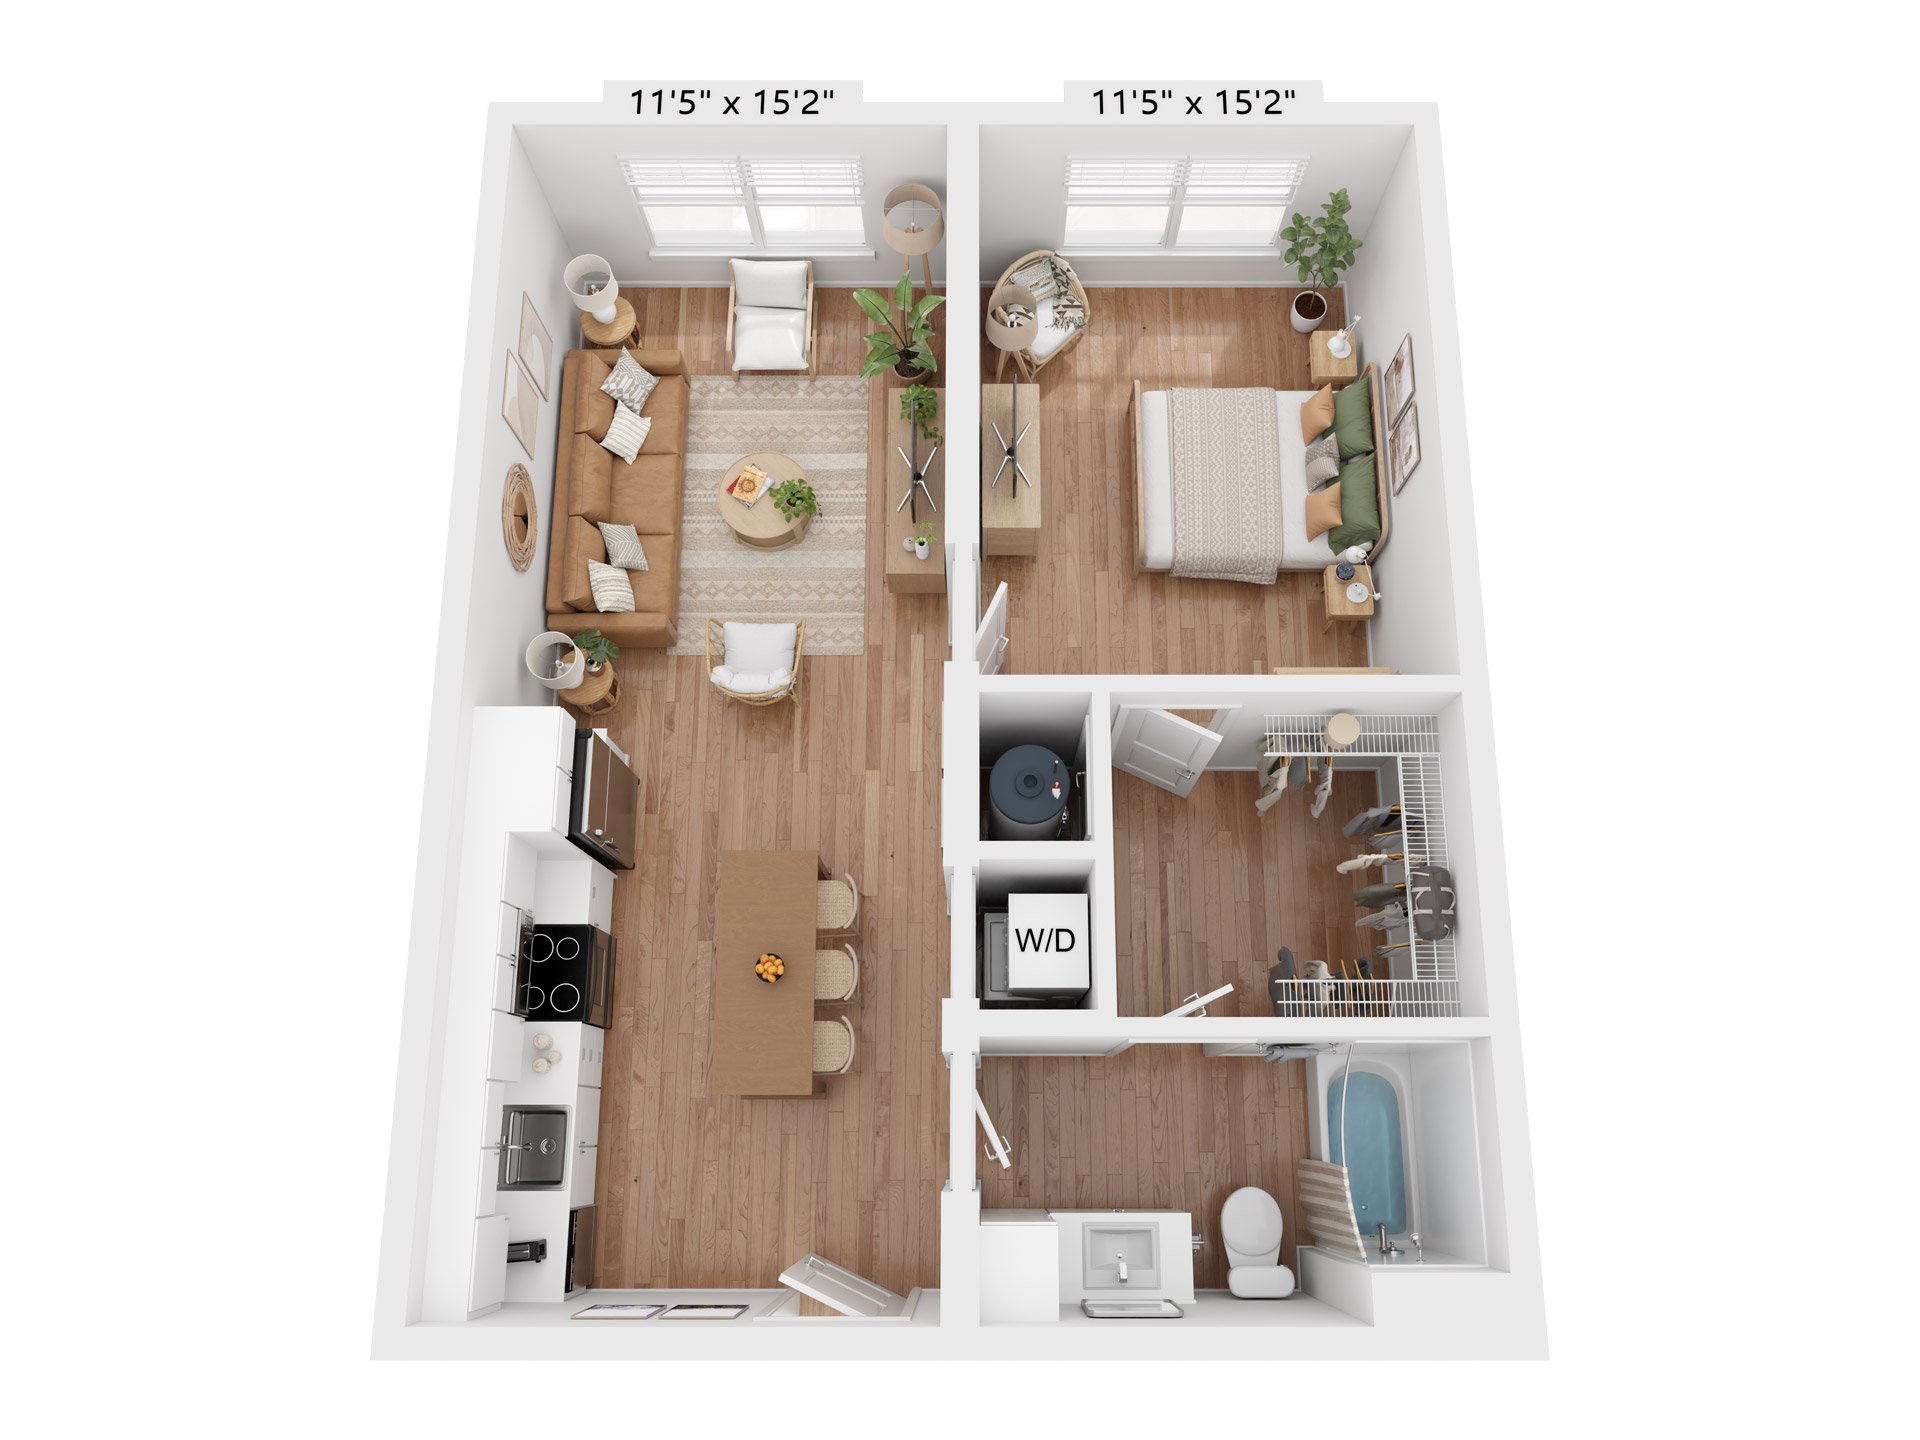 Floor plan map for a three bedroom apartment at Ltd. Findlay in Coraopolis, PA, featuring rooms with dimensions.